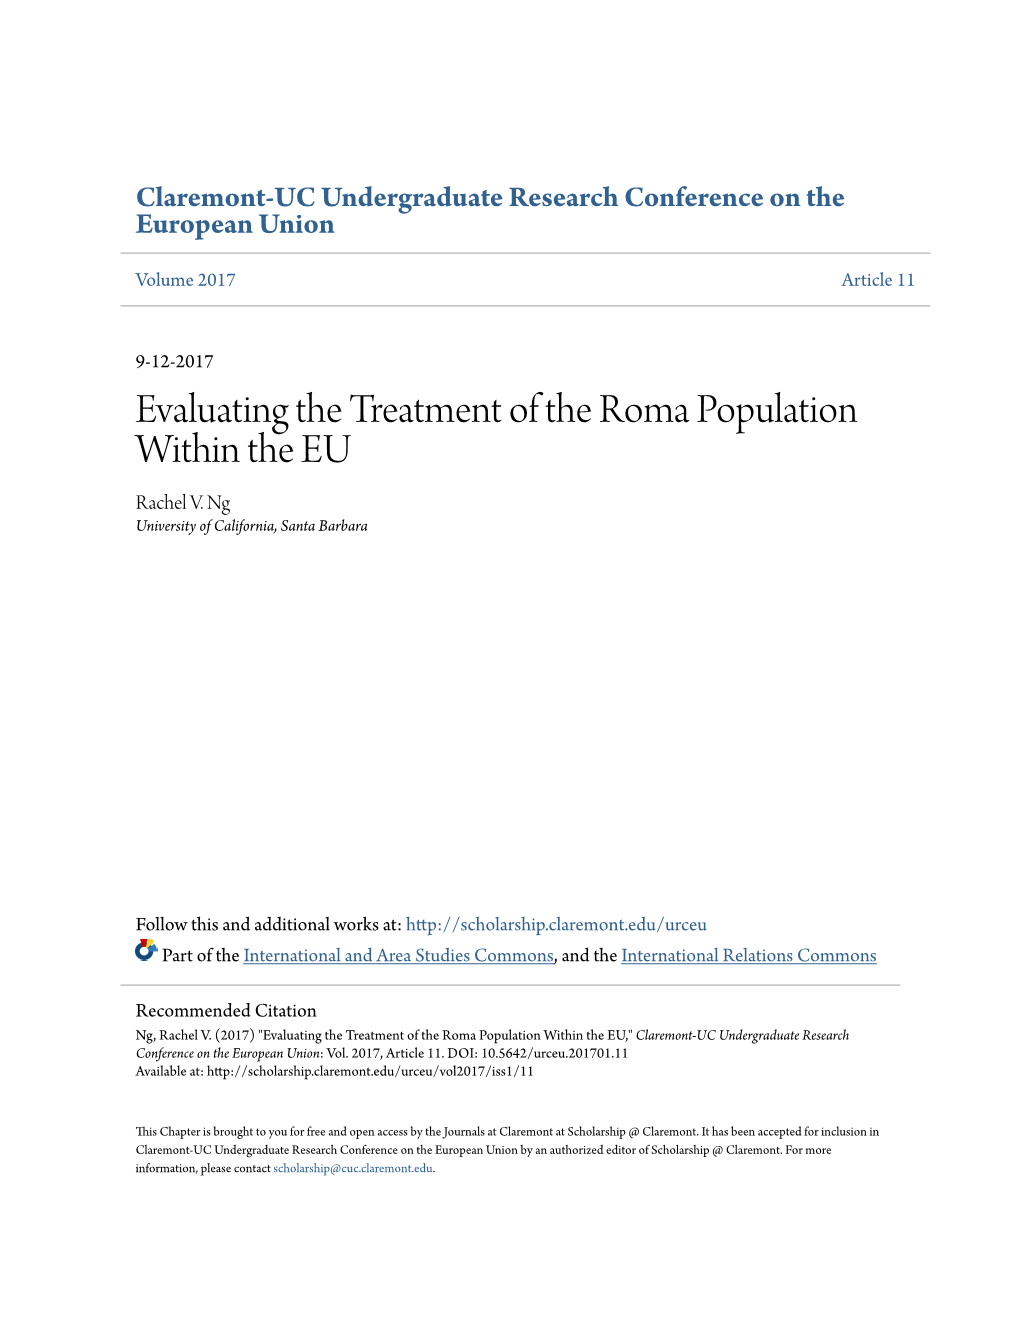 Evaluating the Treatment of the Roma Population Within the EU Rachel V